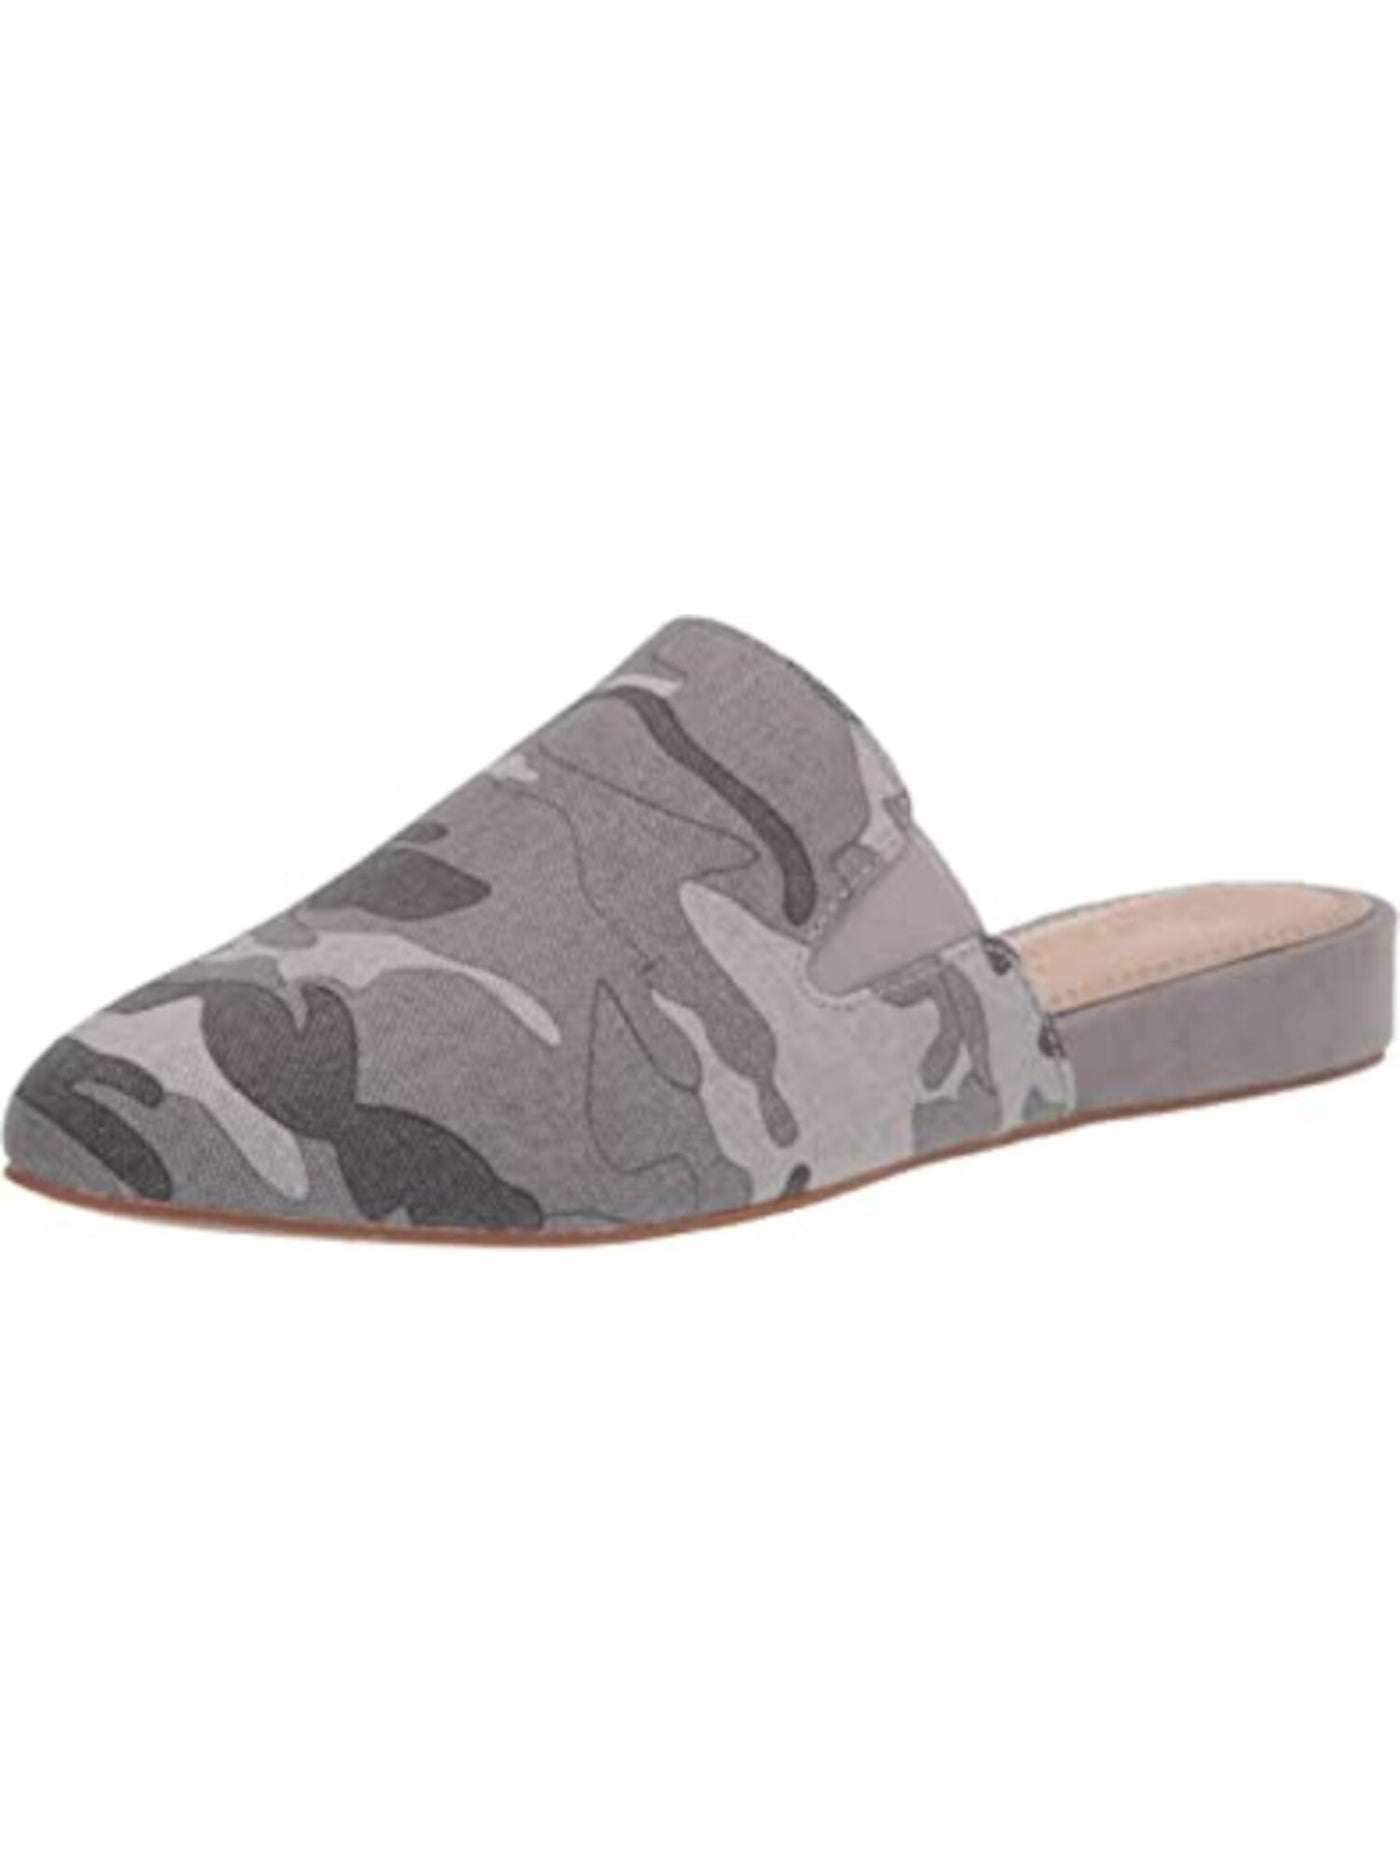 SPEECHLESS Womens Gray Camouflage Stretch Gore Comfort Lorne Round Toe Wedge Slip On Mules 6 M